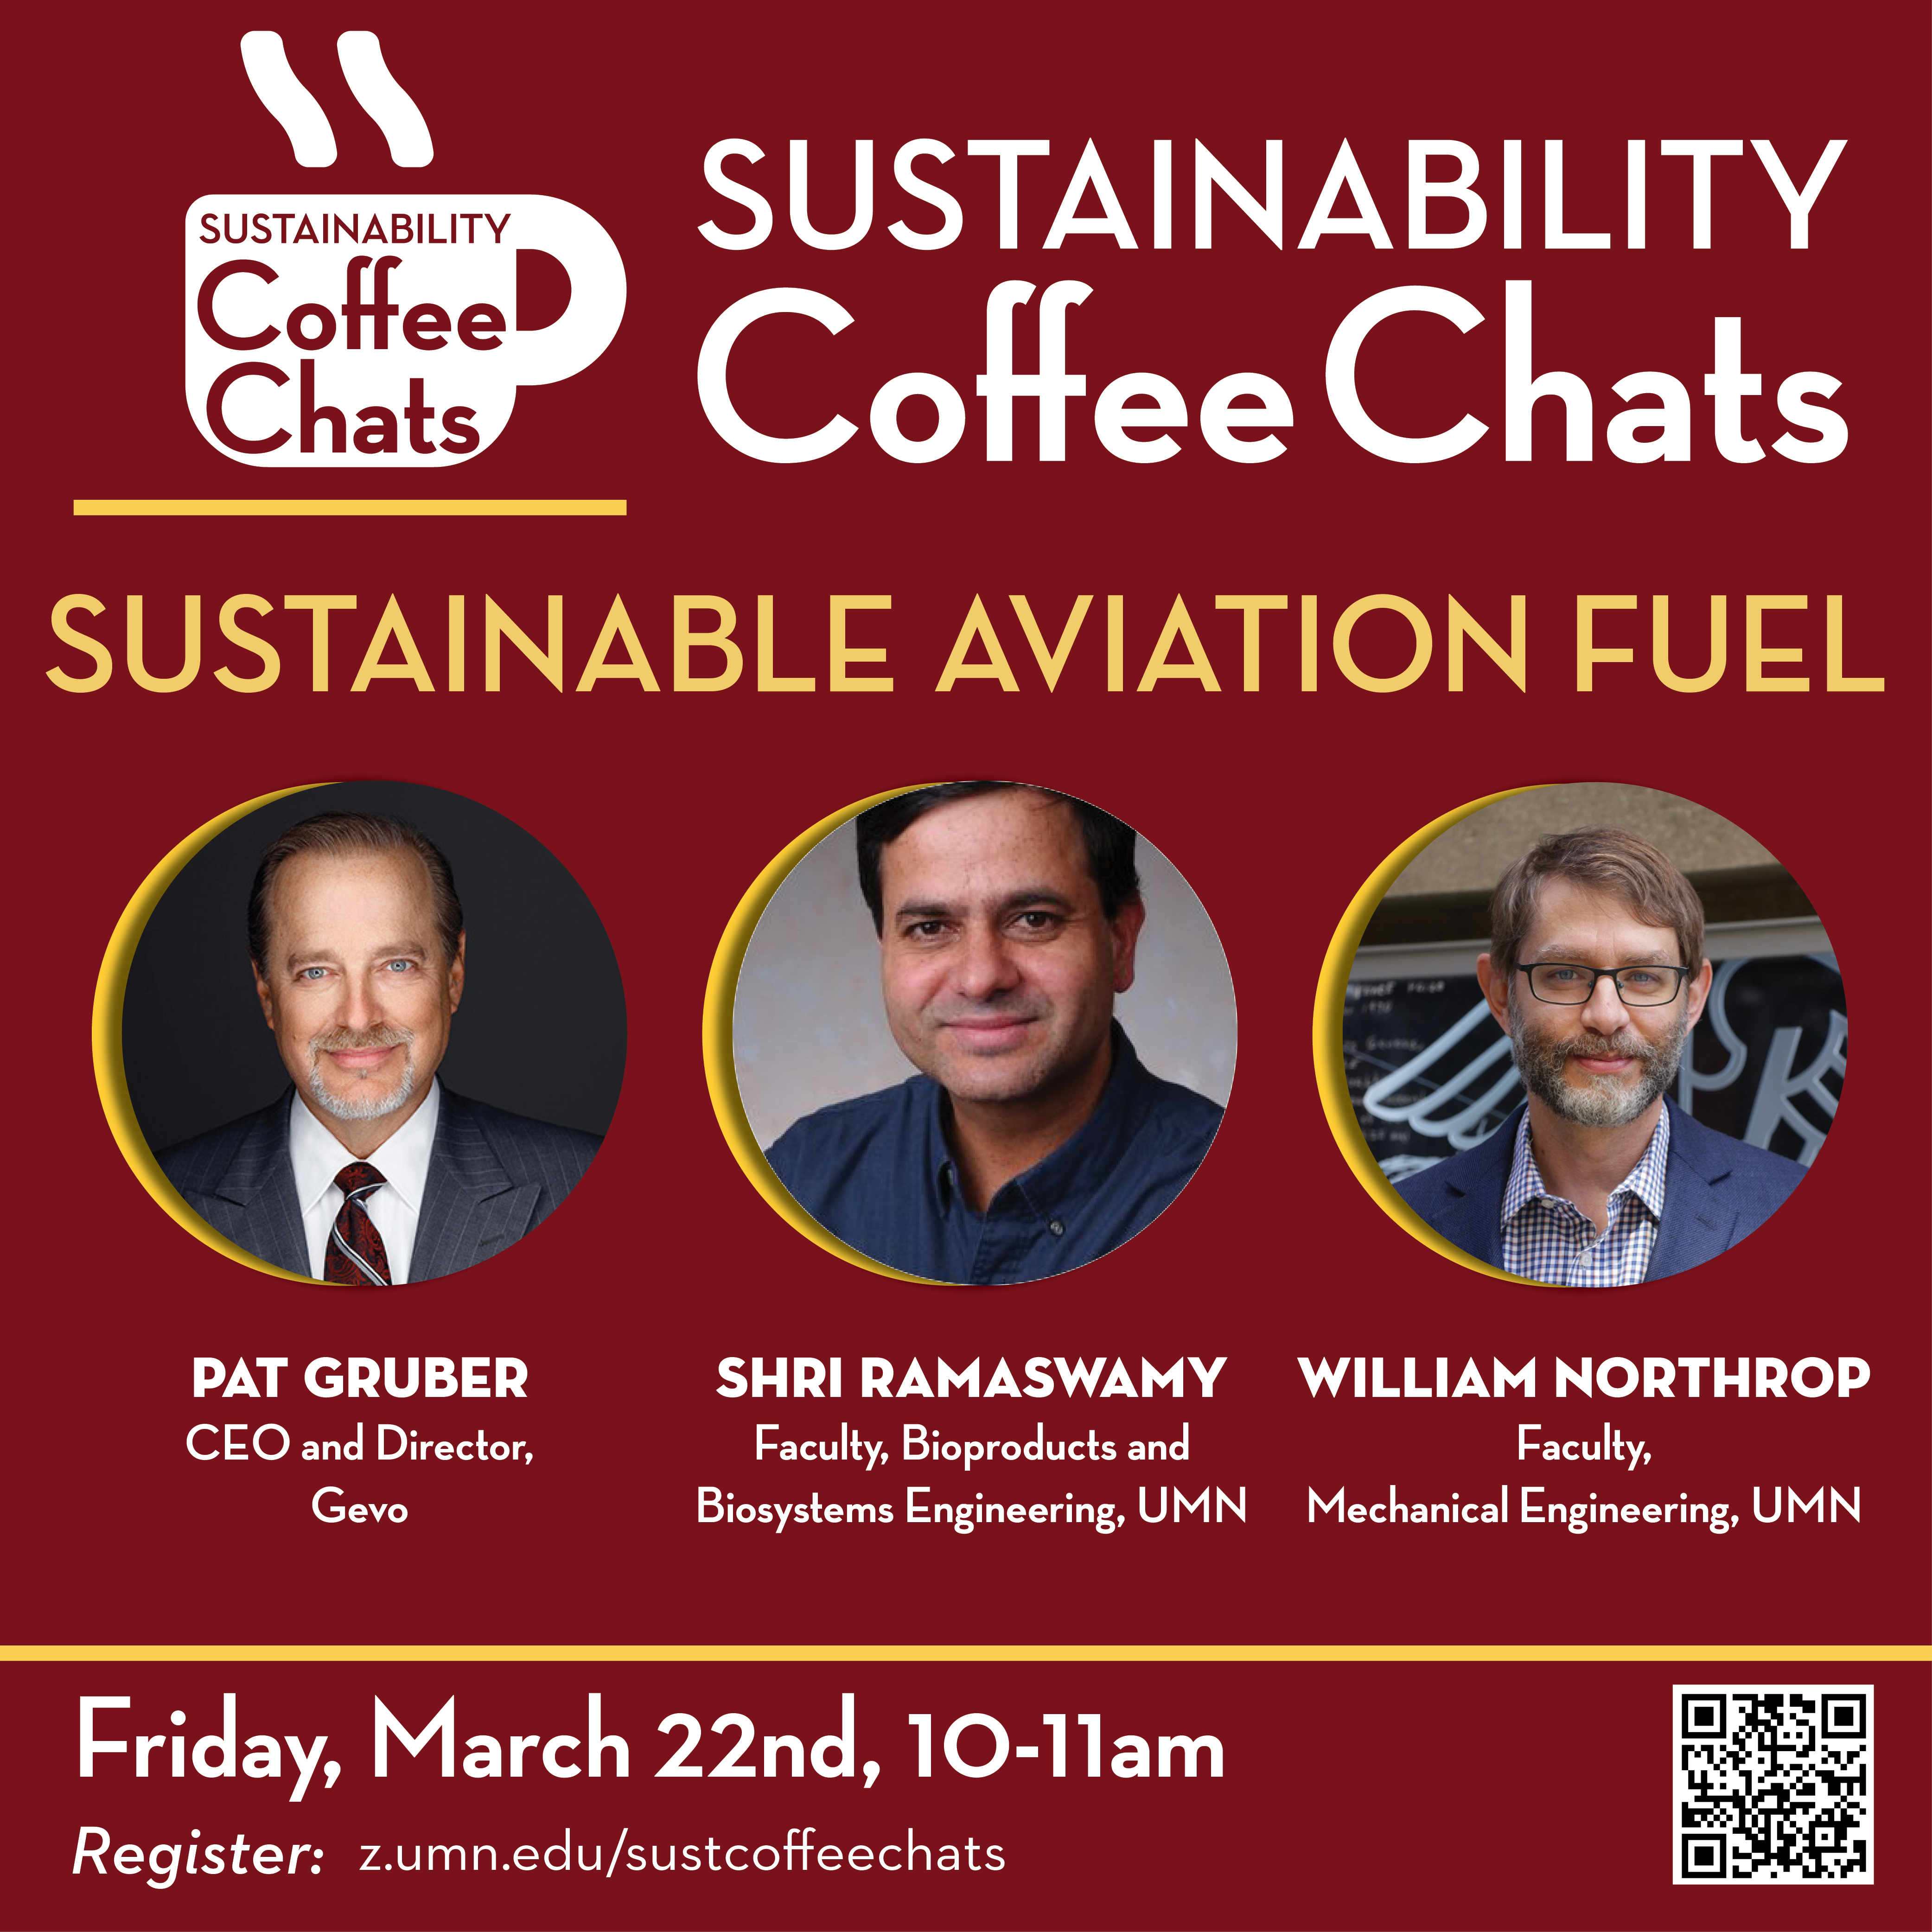 Sustainability Coffee Chats Graphic for Sustainable Aviation Fuel